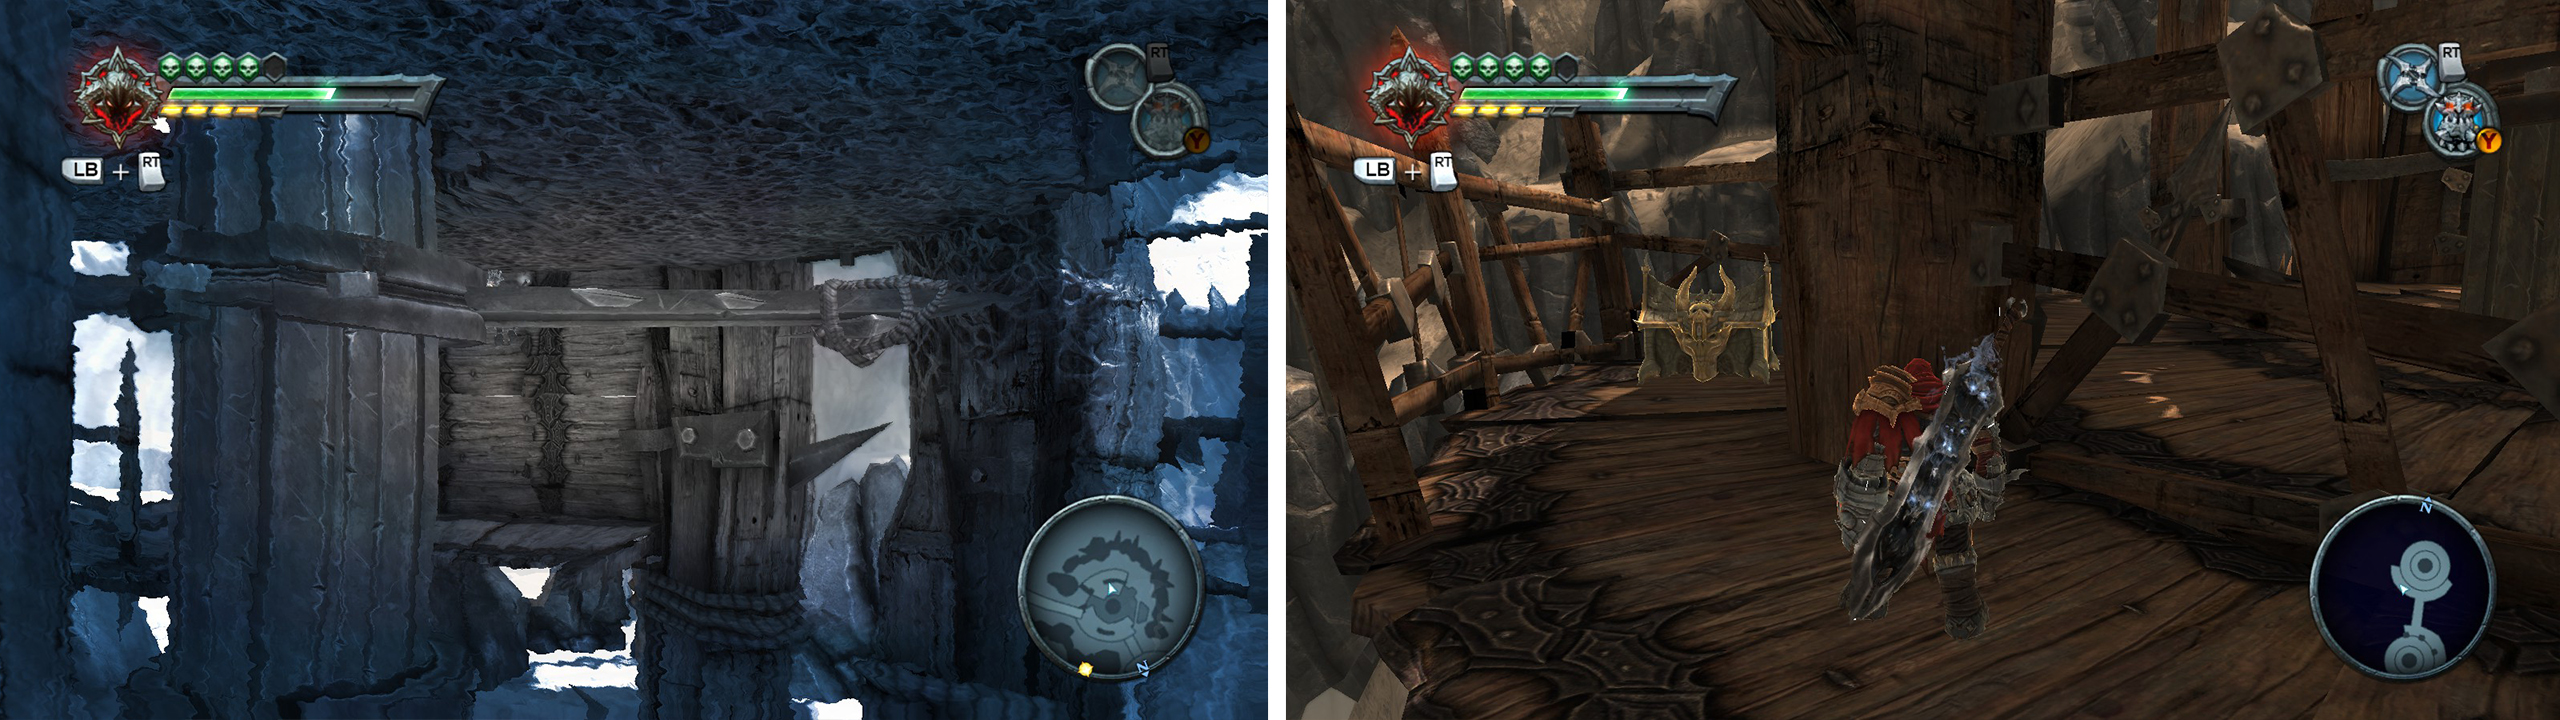 Use the chronosphere to safely traverse the roof (left). Climb to the top of the structure and loot the chest (right)